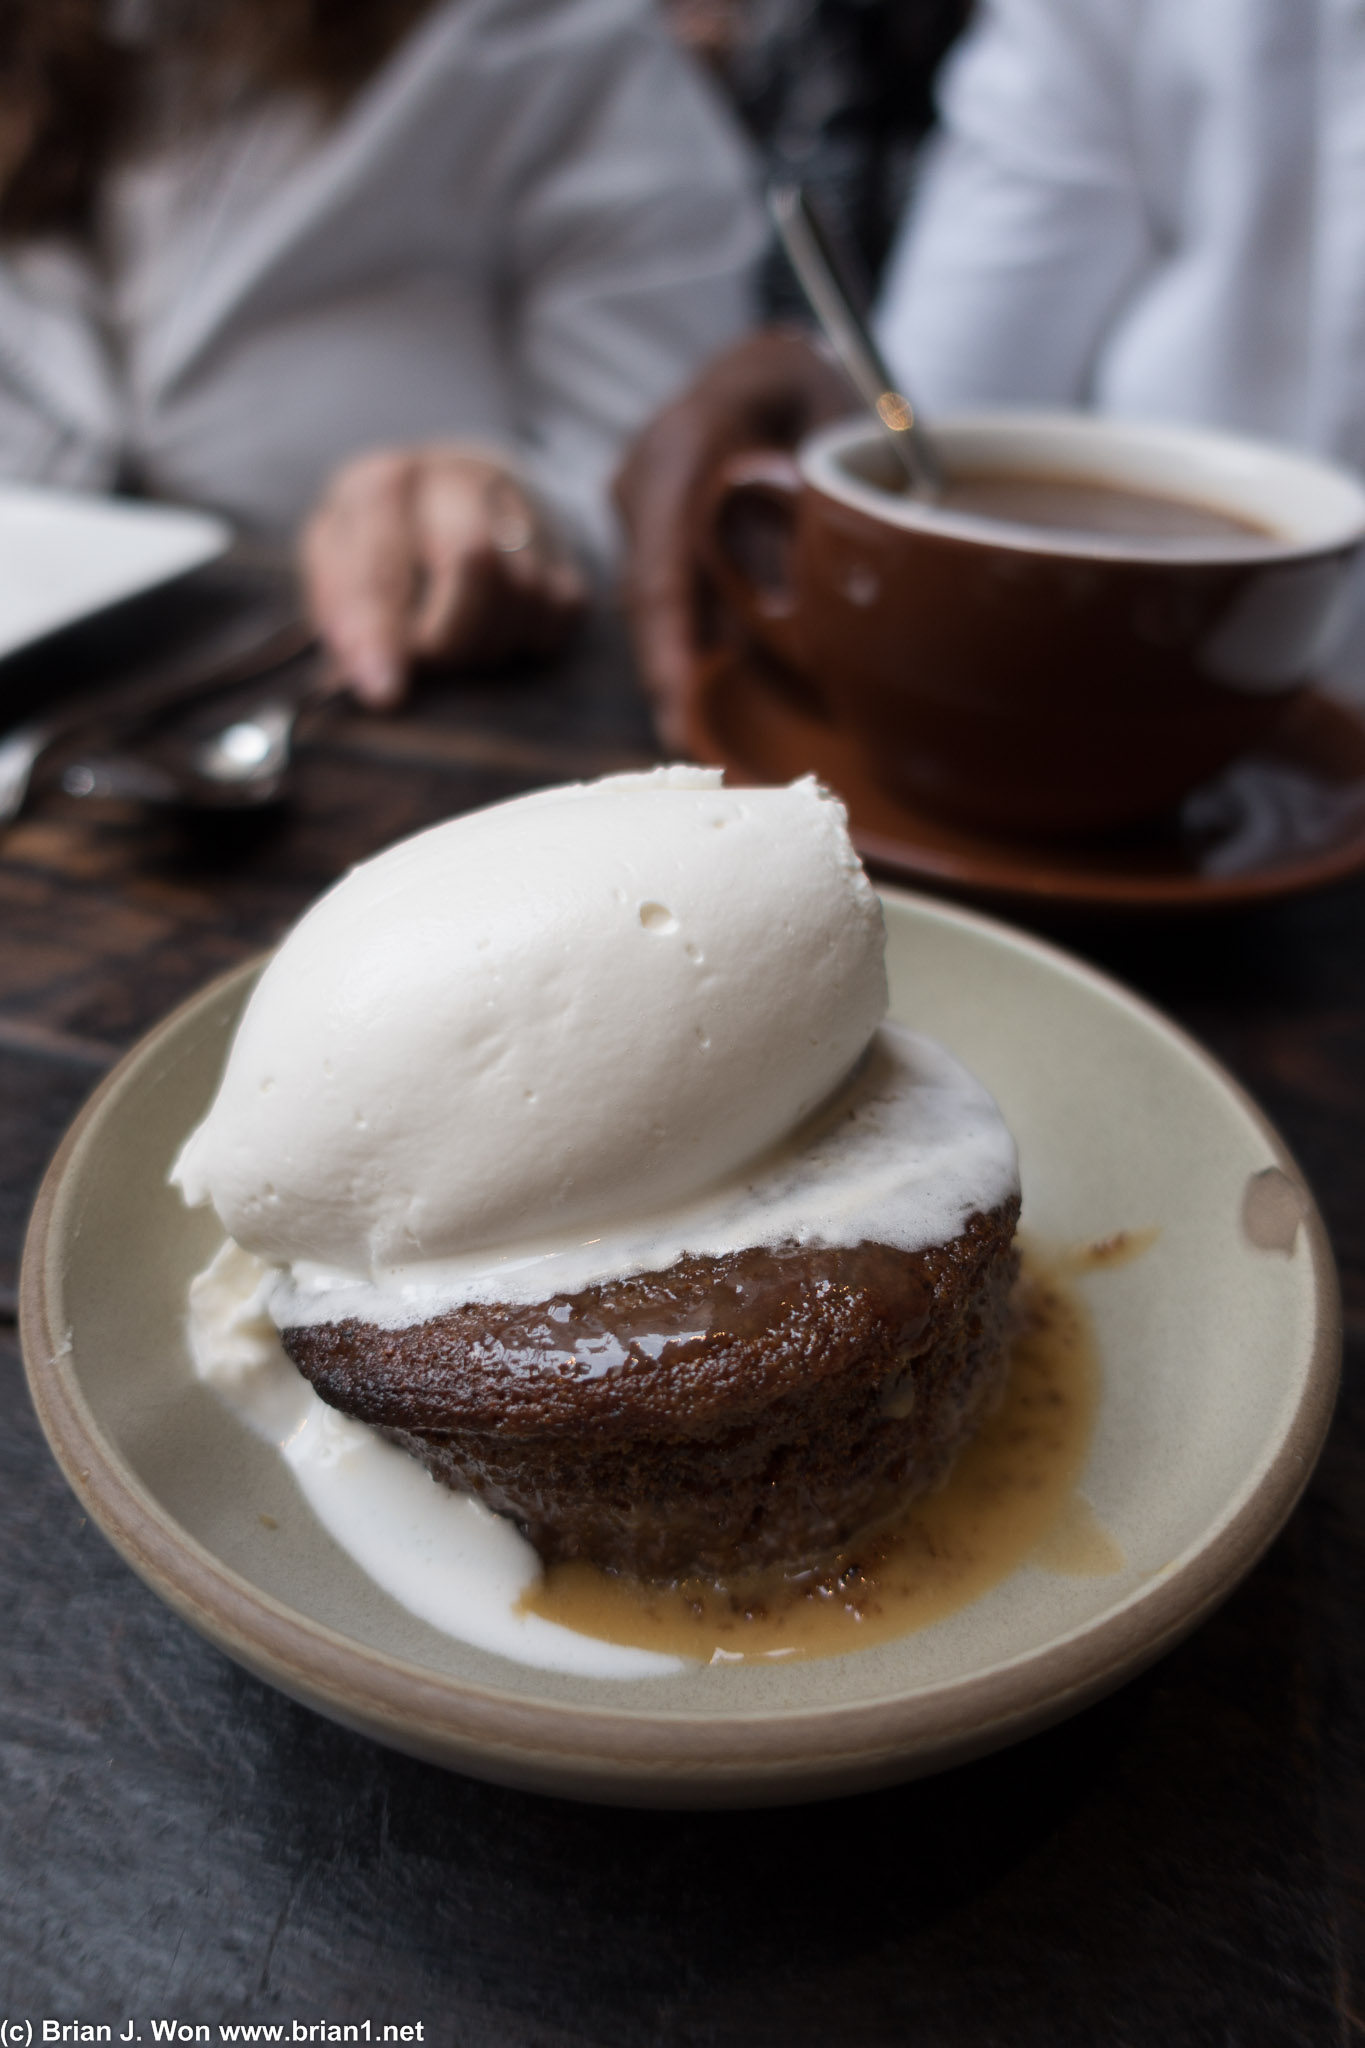 Sticky toffee pudding was, like much of the meal, quality, reasonably well executed, yet forgettable.